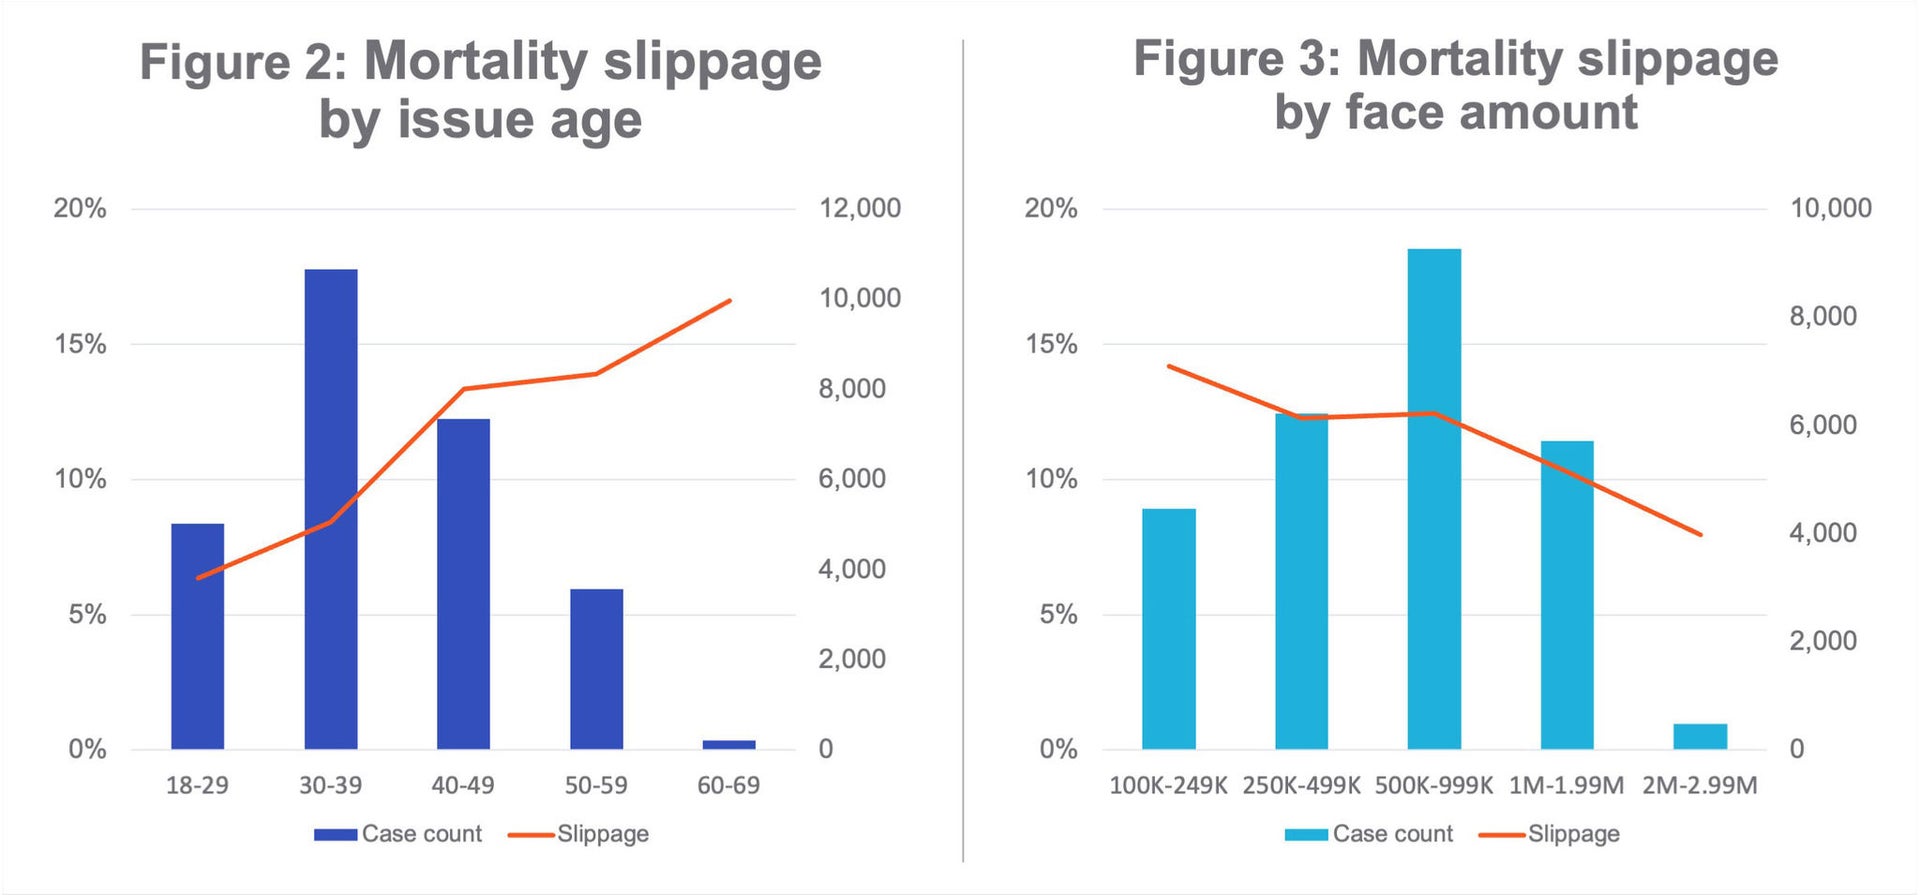 Two bar graphs showing the mortality slippage by issue age and face amount.